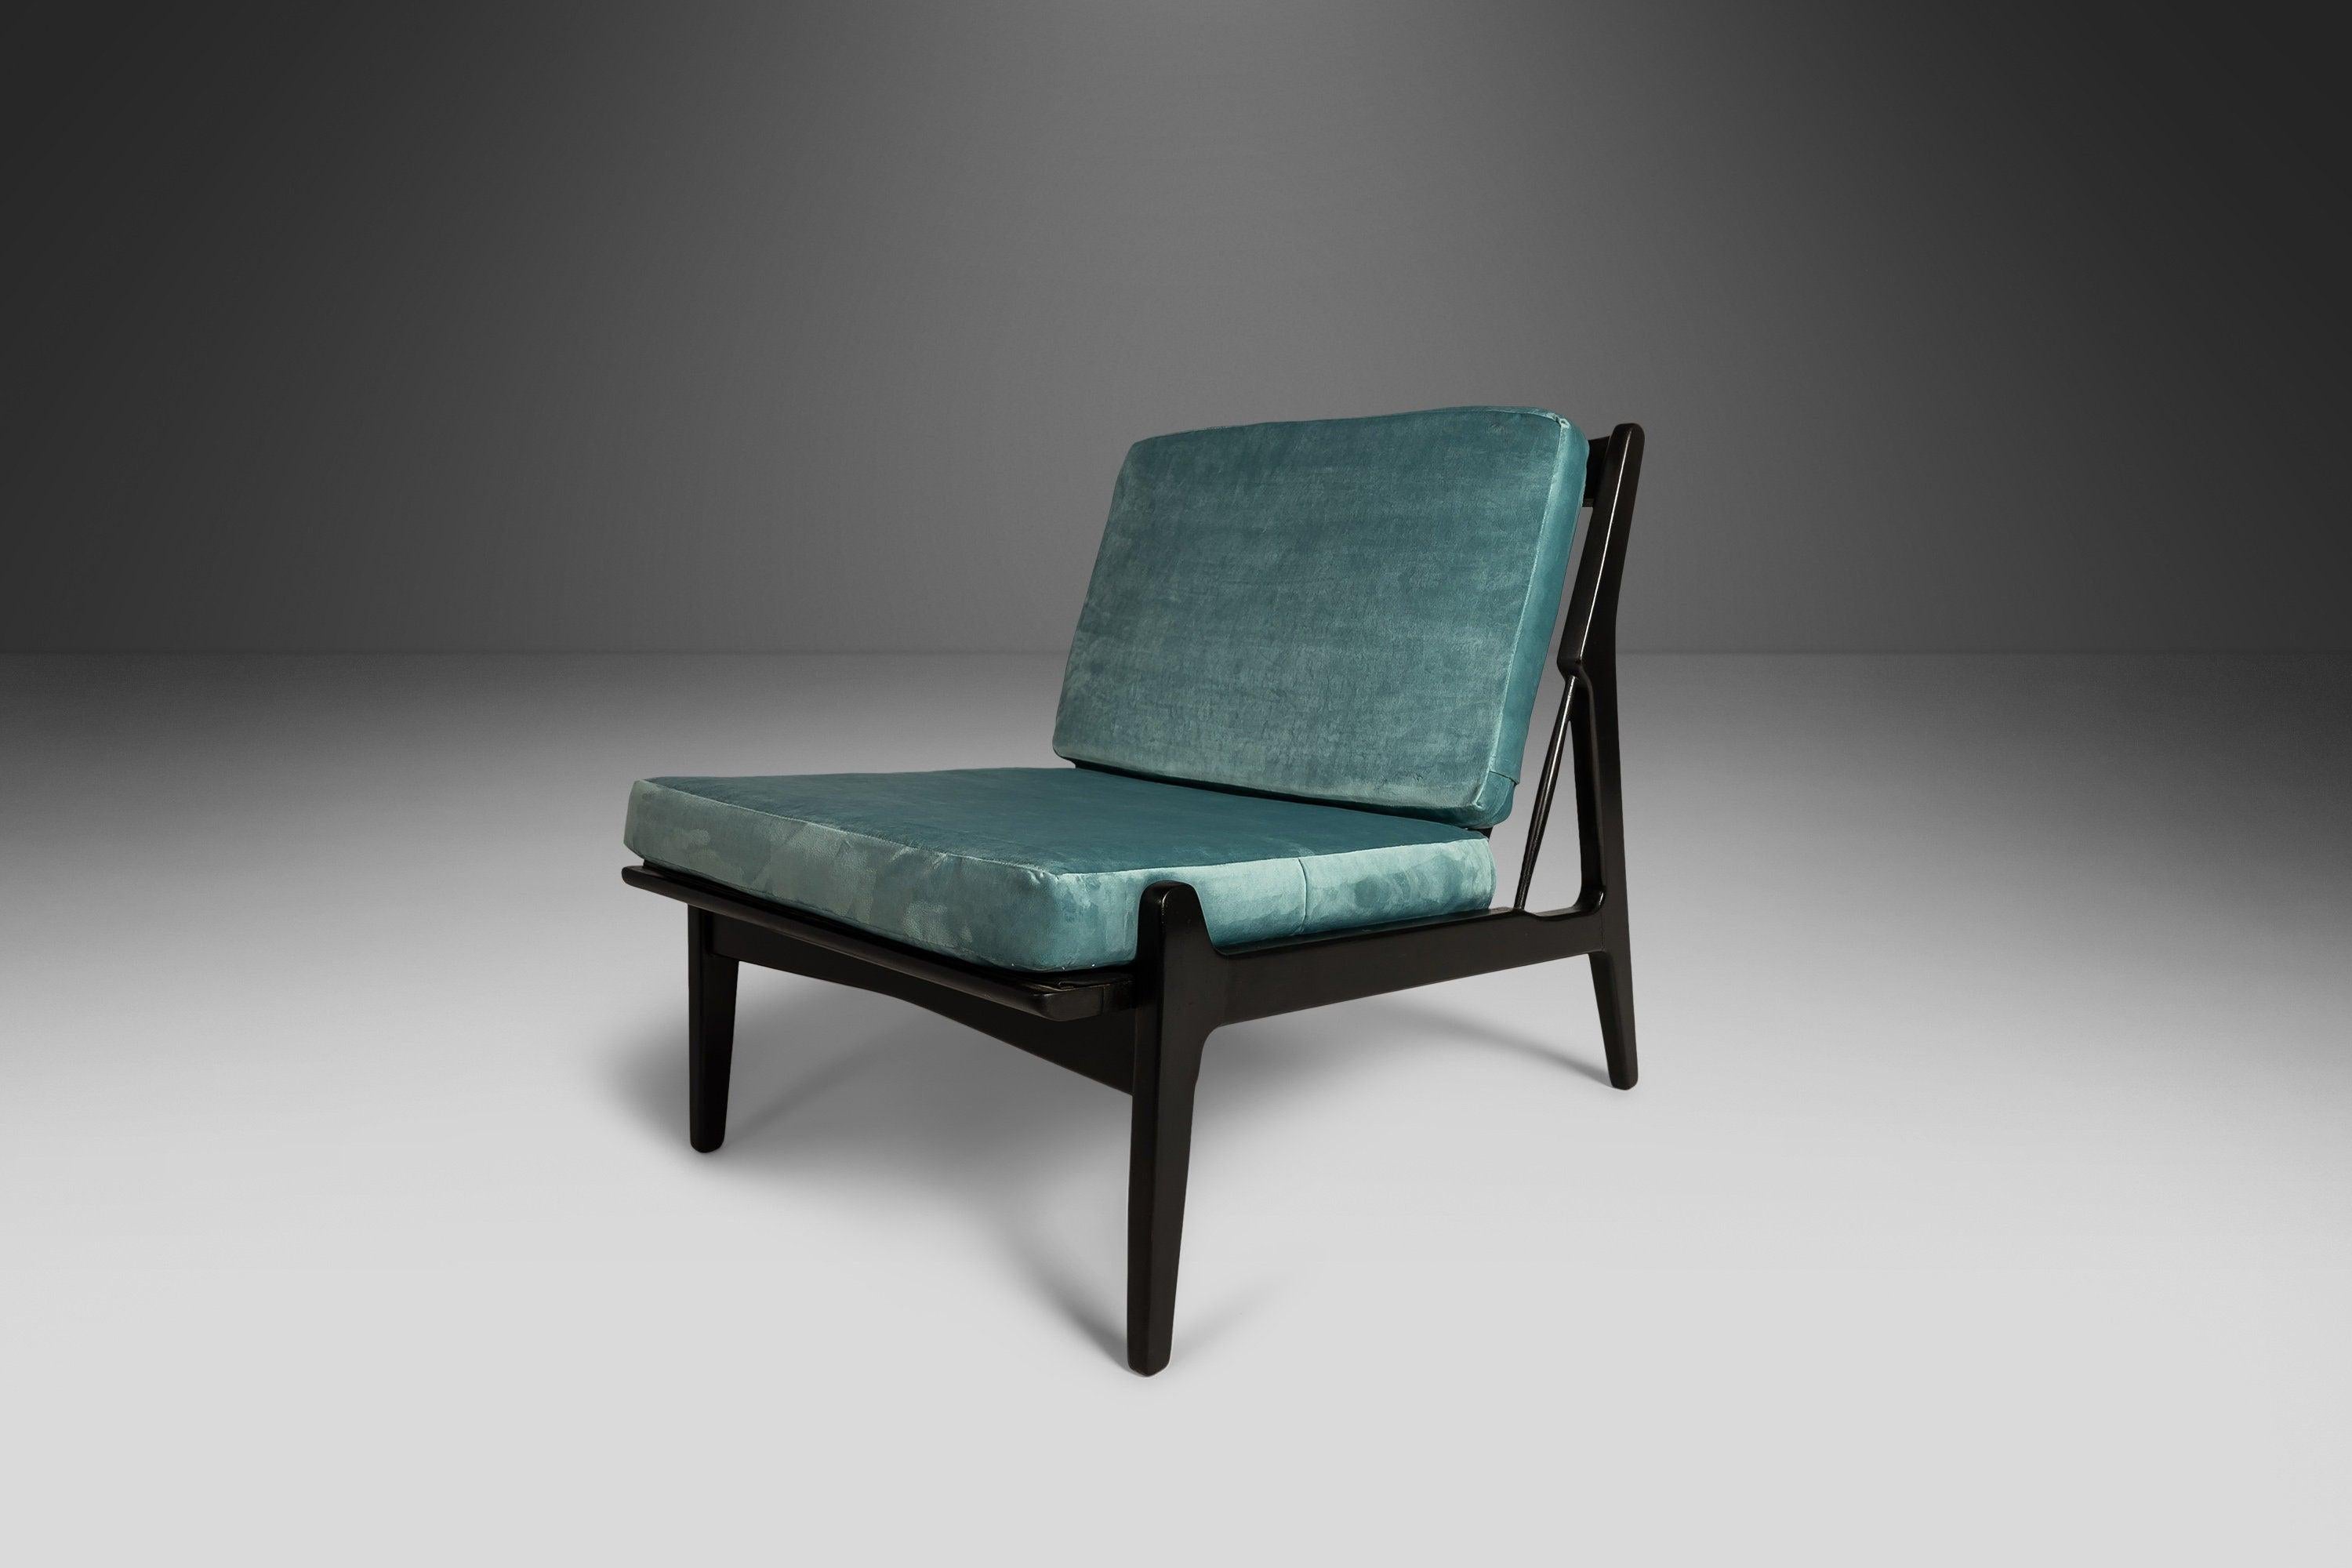 Danish Set of Two '2' Rare Lounge Chairs by Ib Kofod Larsen for Selig, Denmark, C. 1950 For Sale